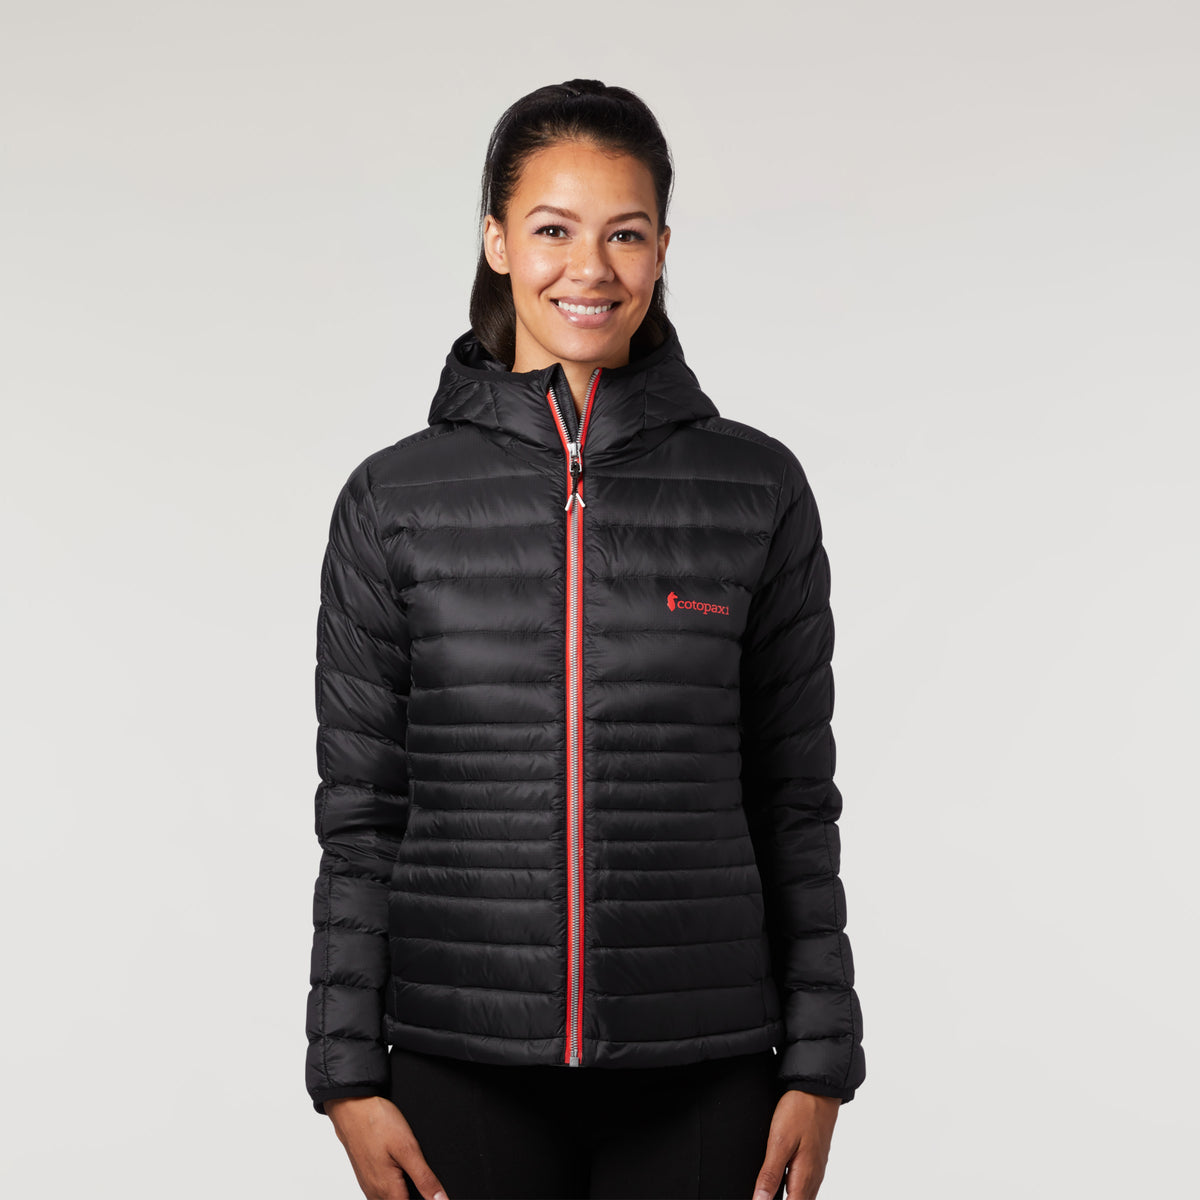 Cotopaxi Fuego Down Jacket Hooded